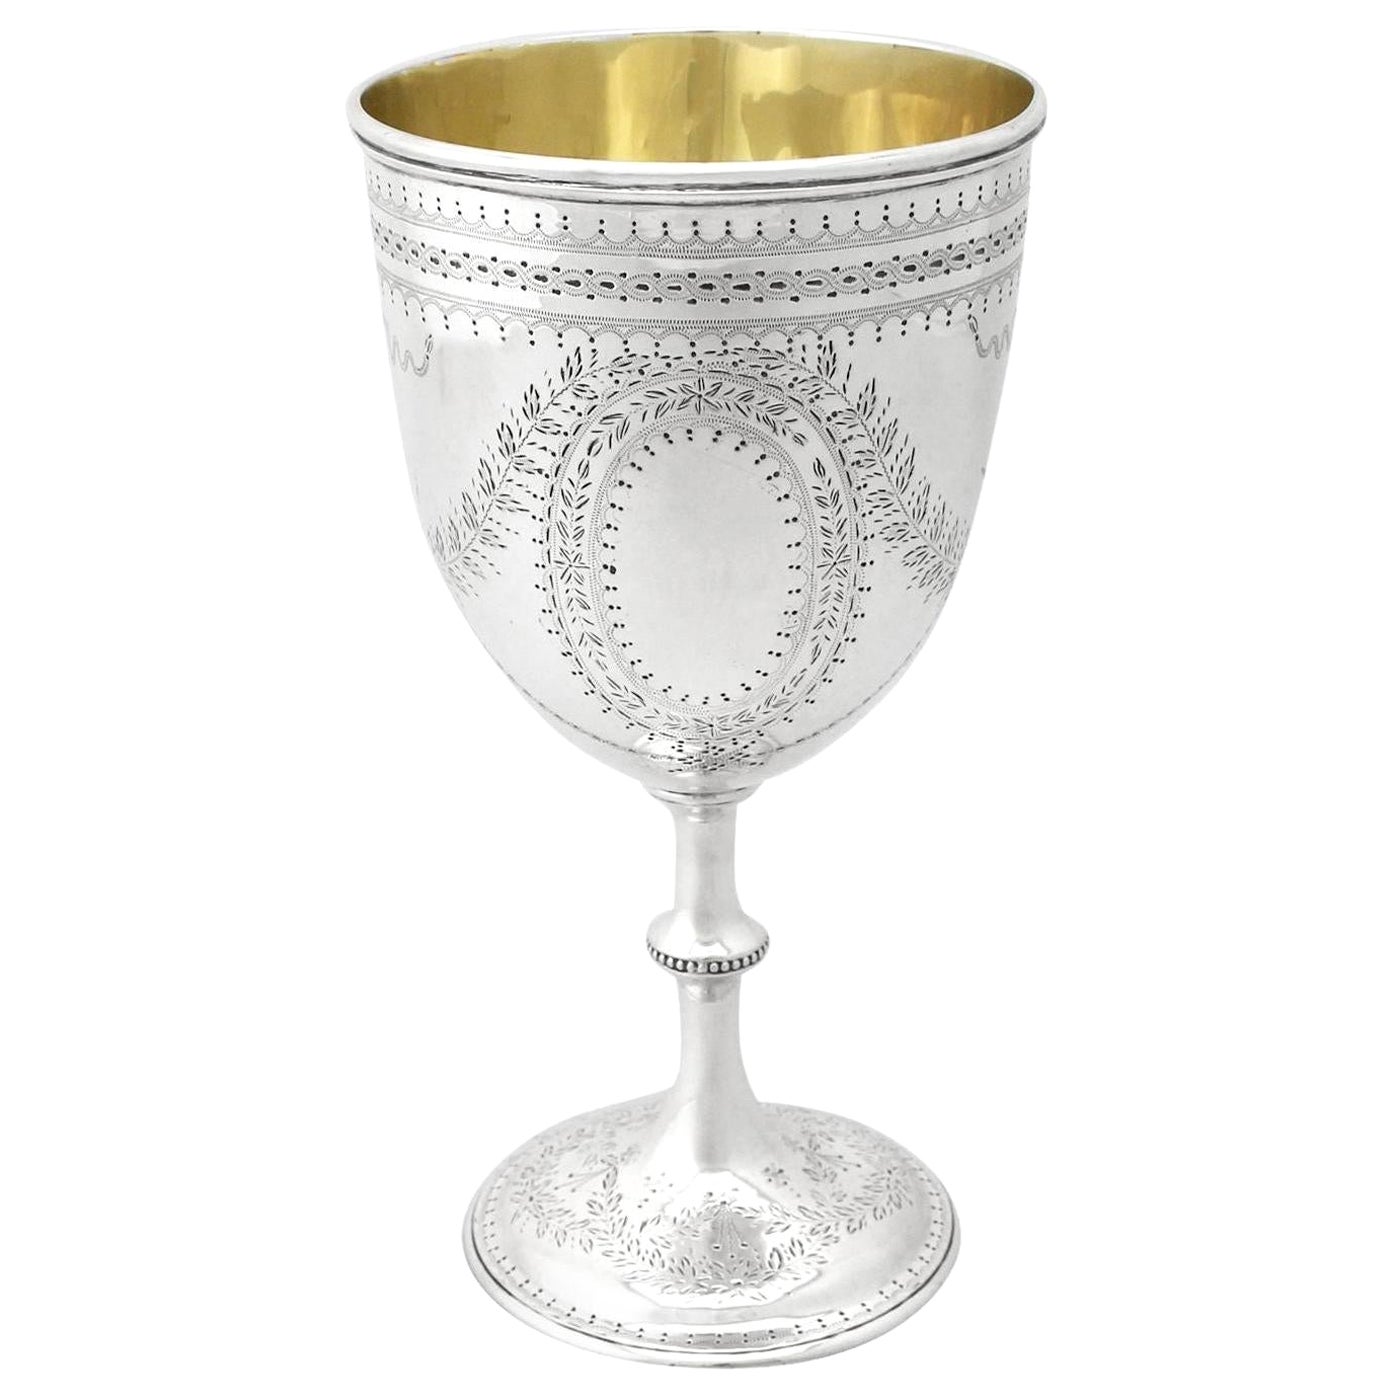 What are goblets used for?